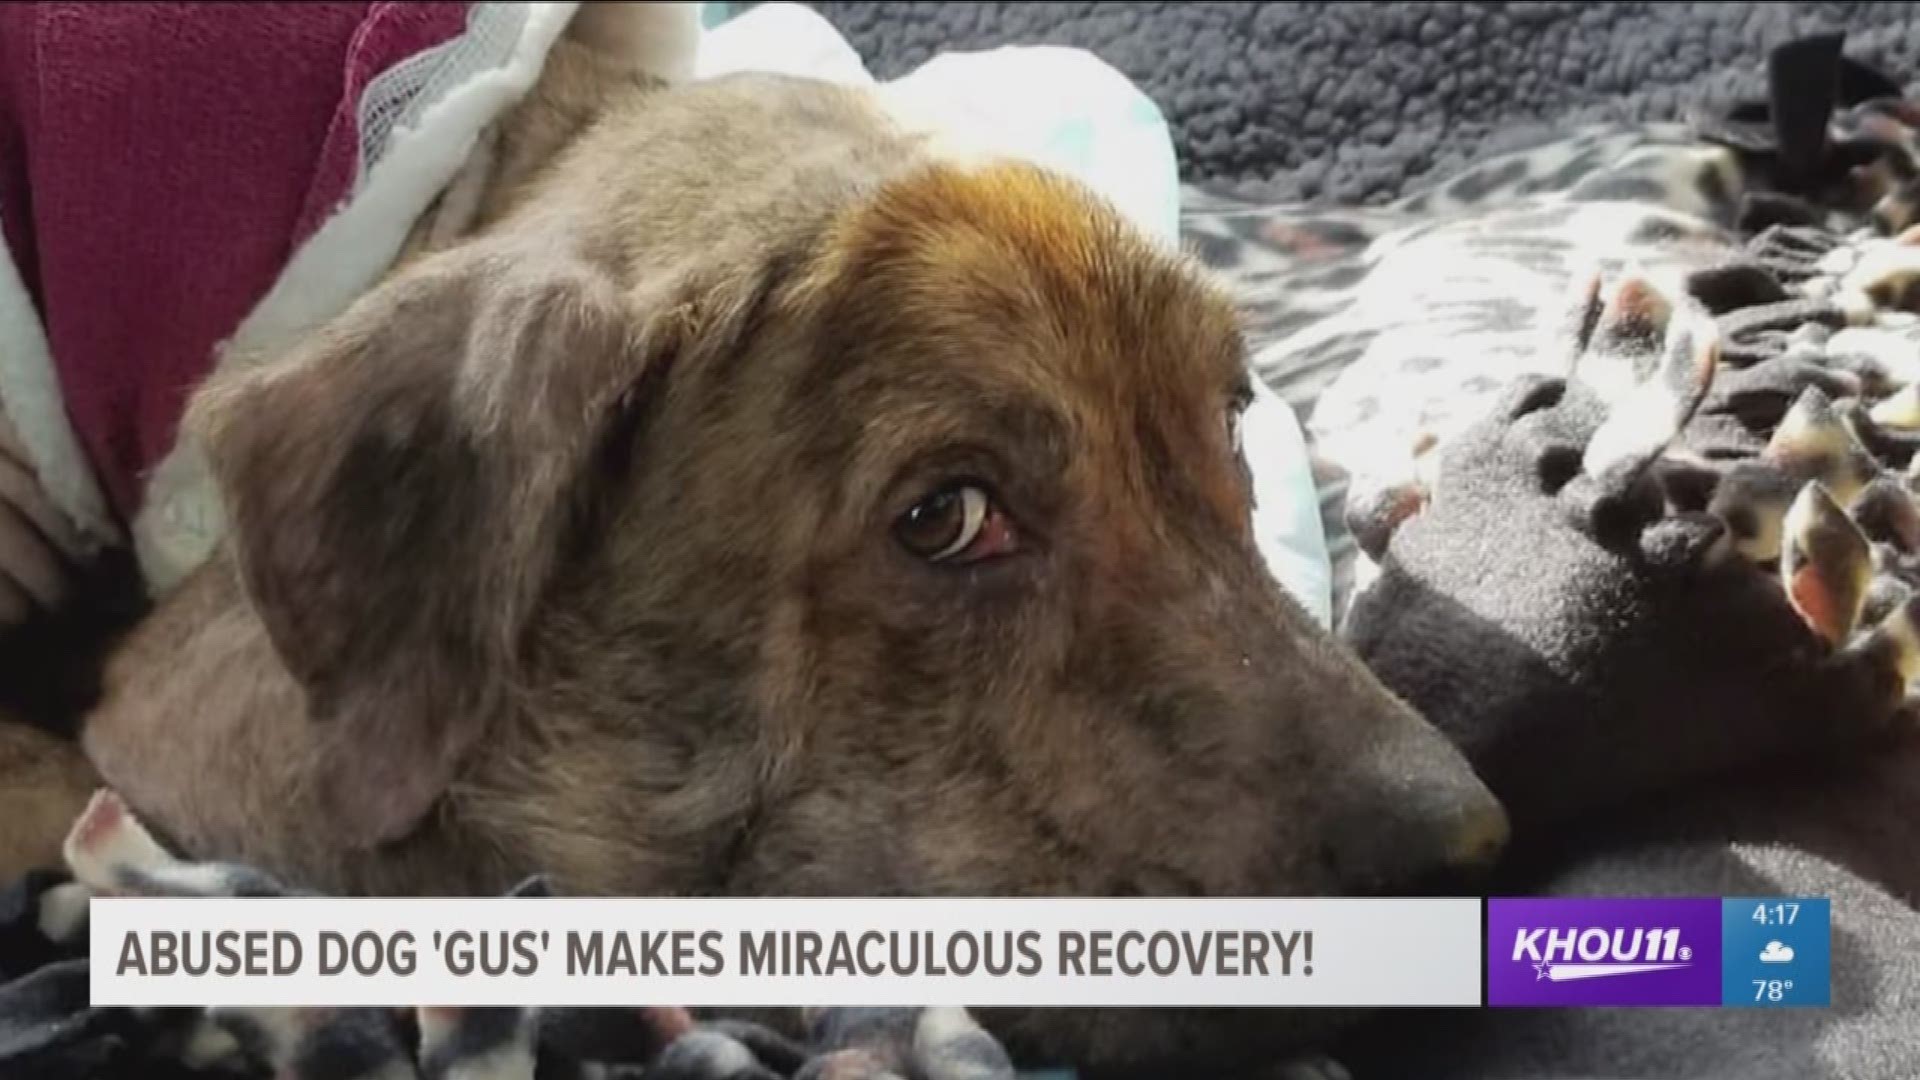 It's amazing how quickly Gus' life has turned around. Less than two weeks ago, Houston K-911 Rescue found the brutally battered dog in horrible condition. His head was swollen, because a shoelace was lodged around his neck. His body was riddled with pelle